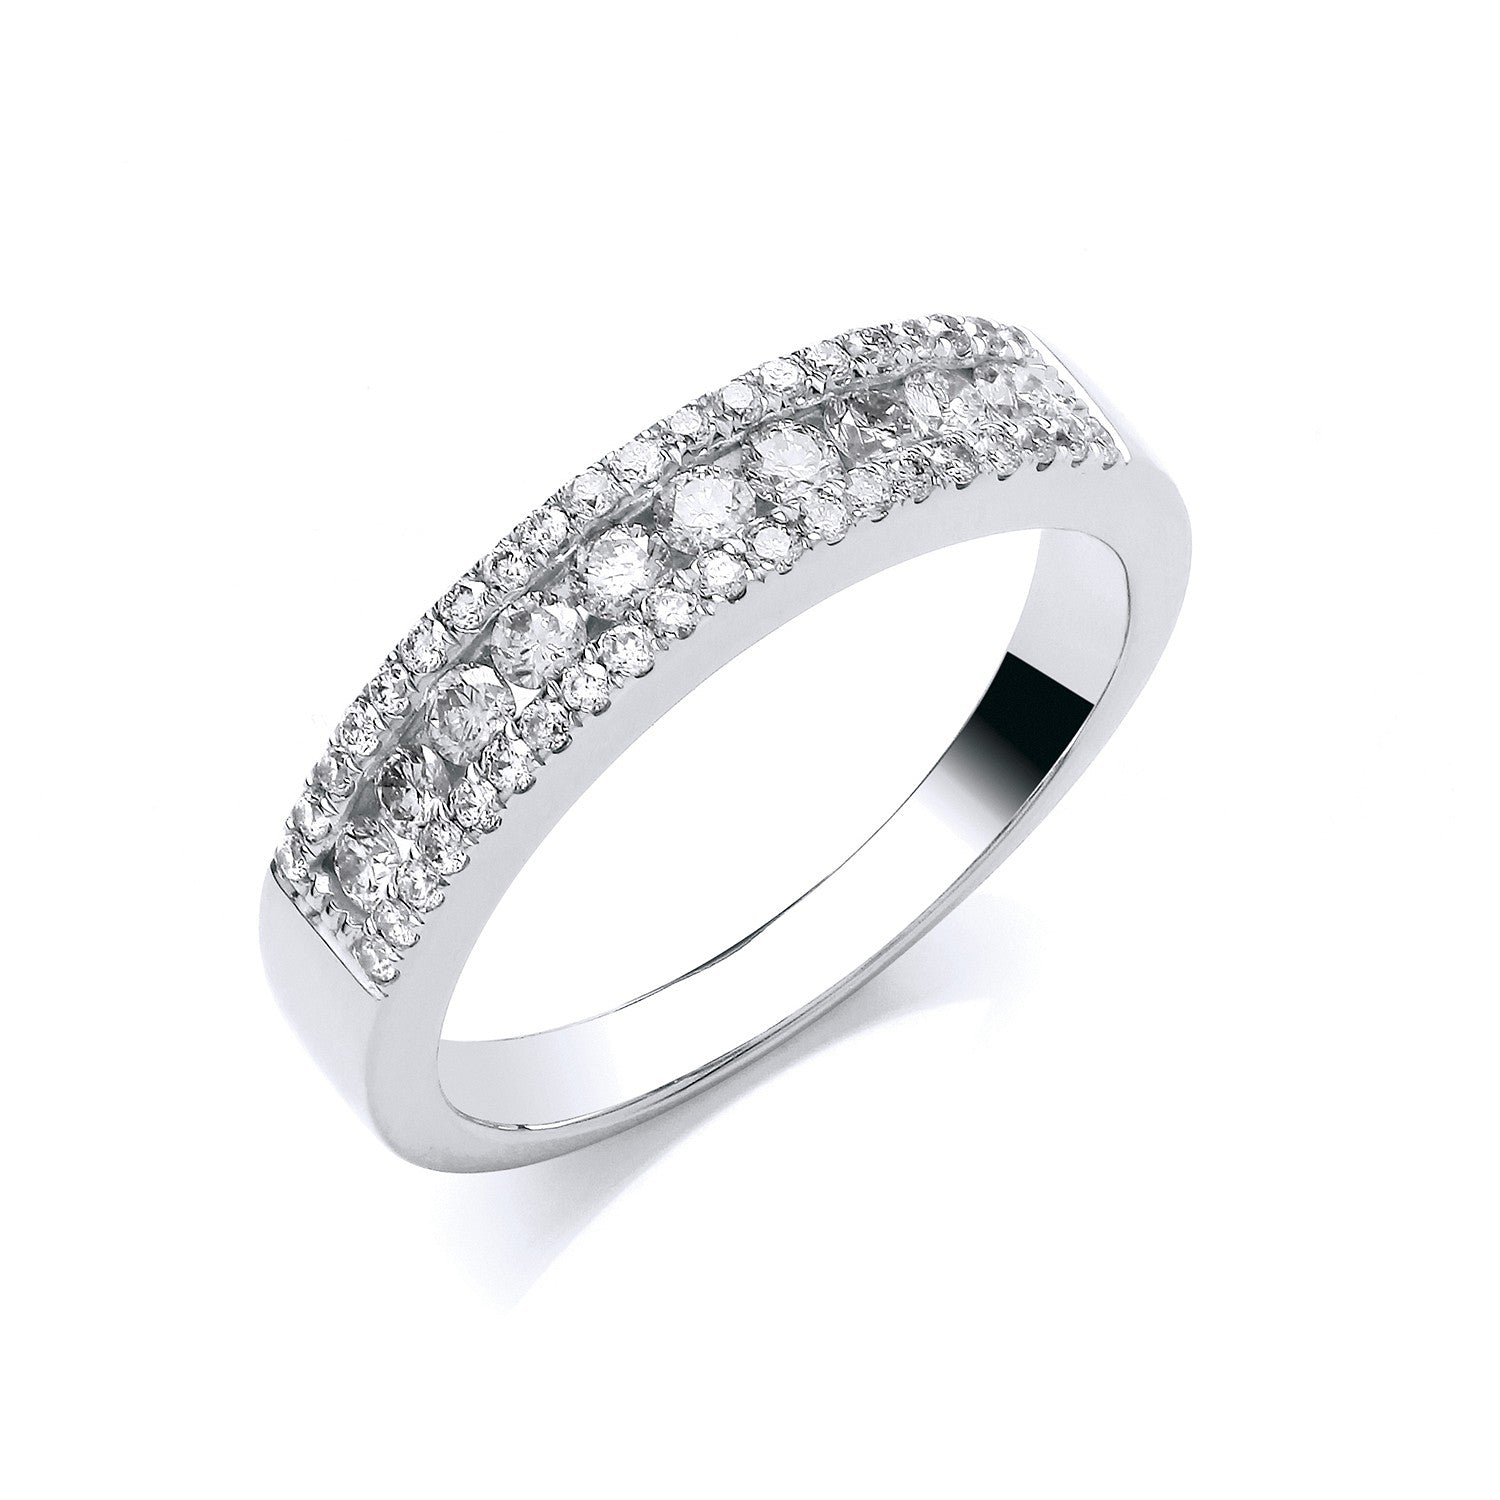 18ct White Gold Half Eternity Ring 4.5mm with 0.50ct Diamond - FJewellery